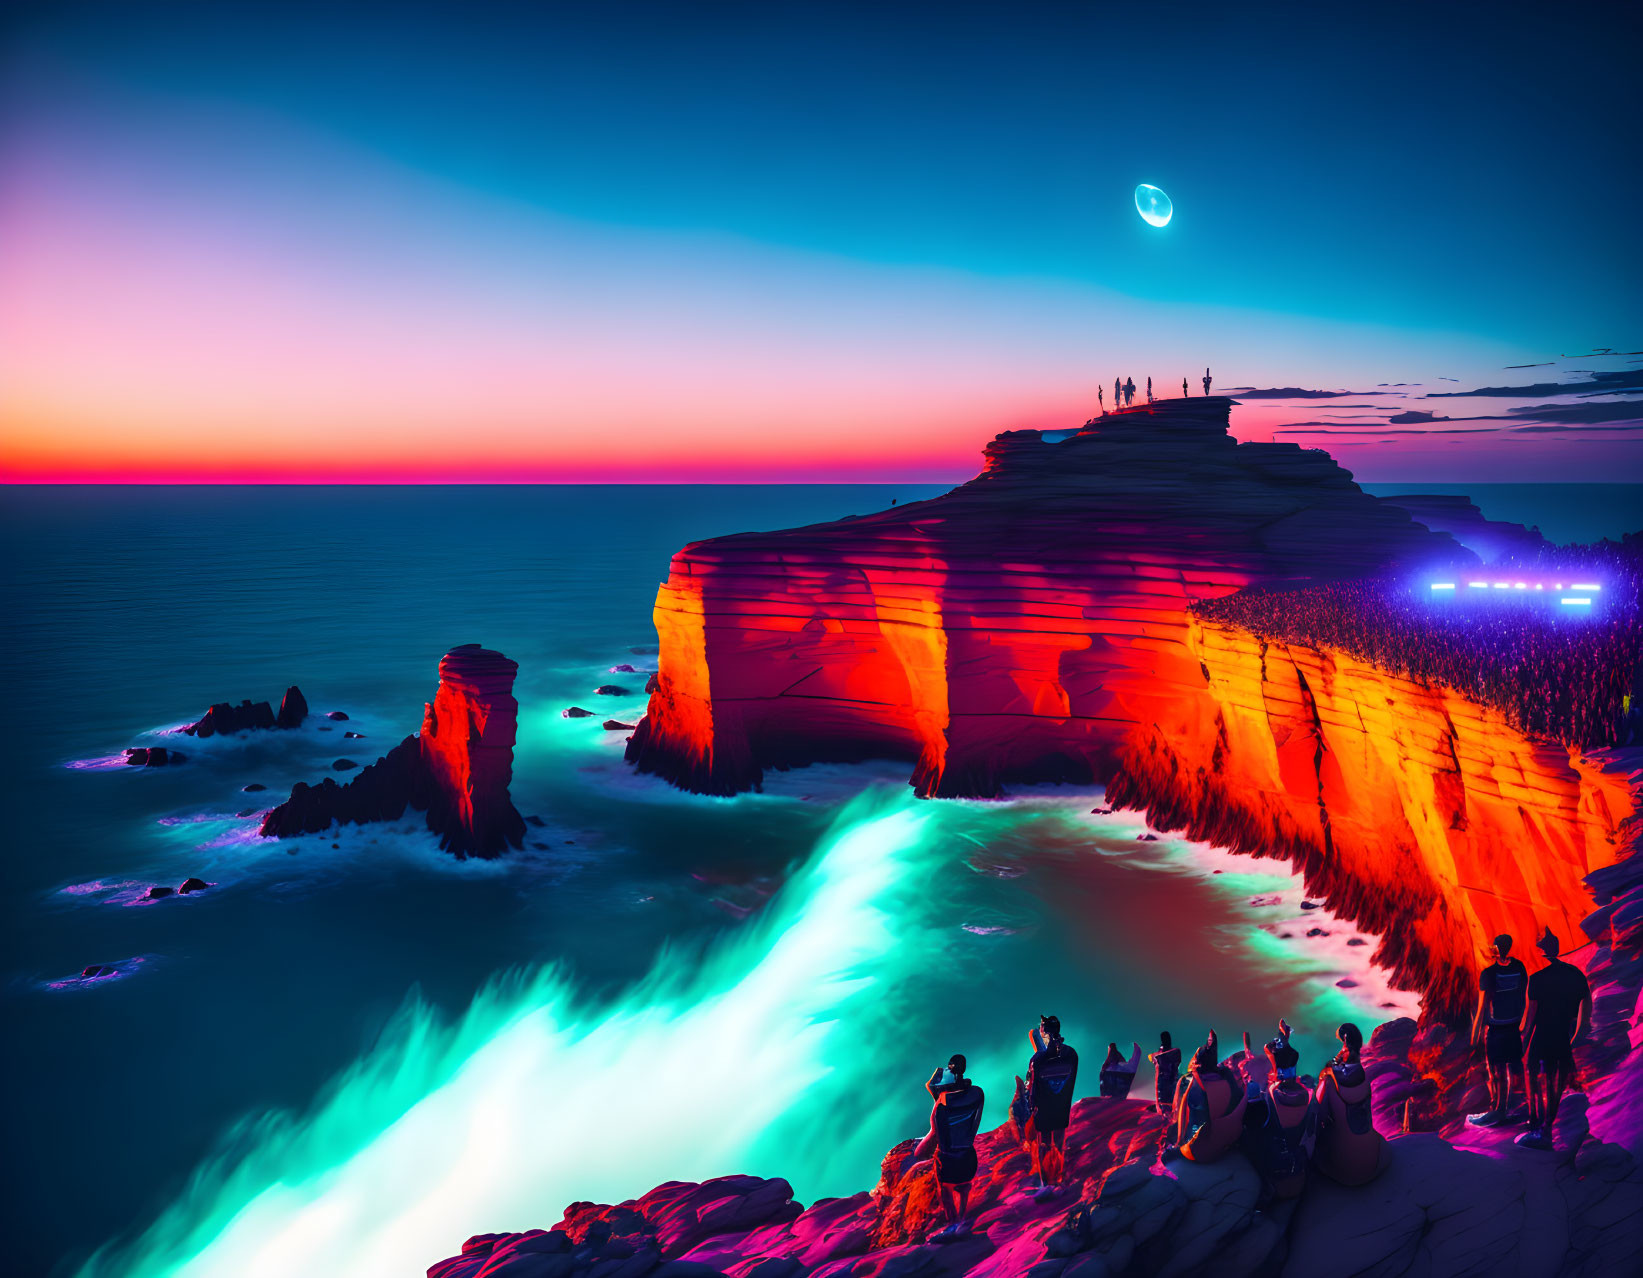 Digital artwork of people on cliffs above neon waves at twilight